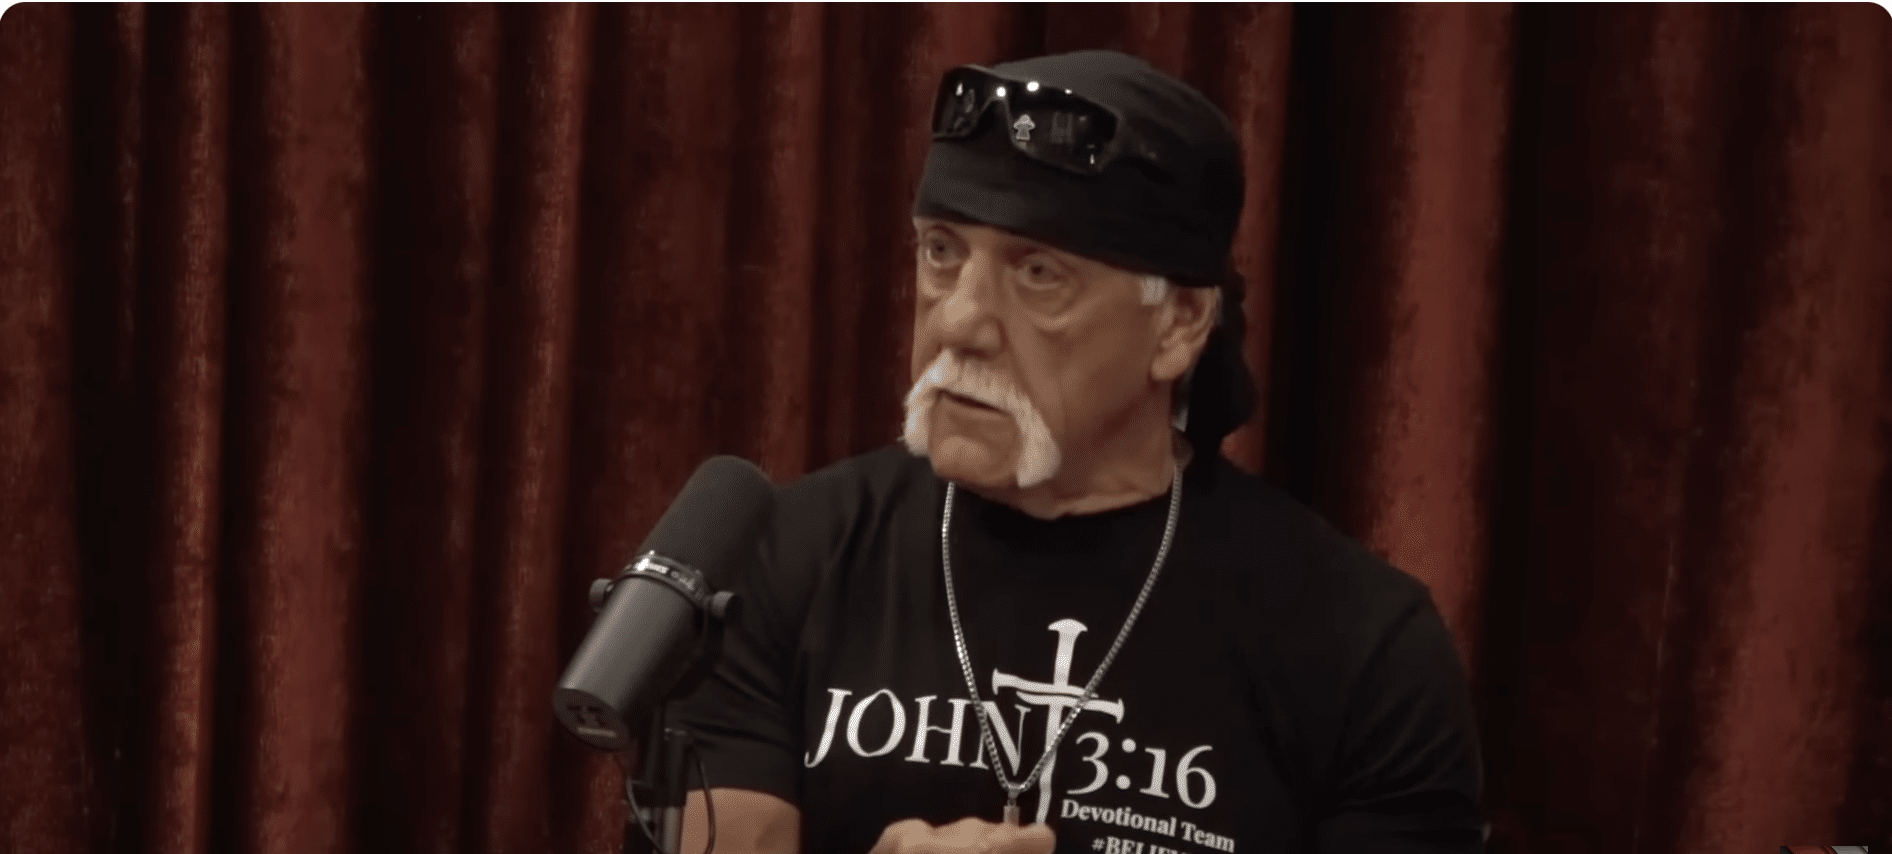 Hulk Hogan invites his fans to turn to Jesus, “He’ll clean you up”